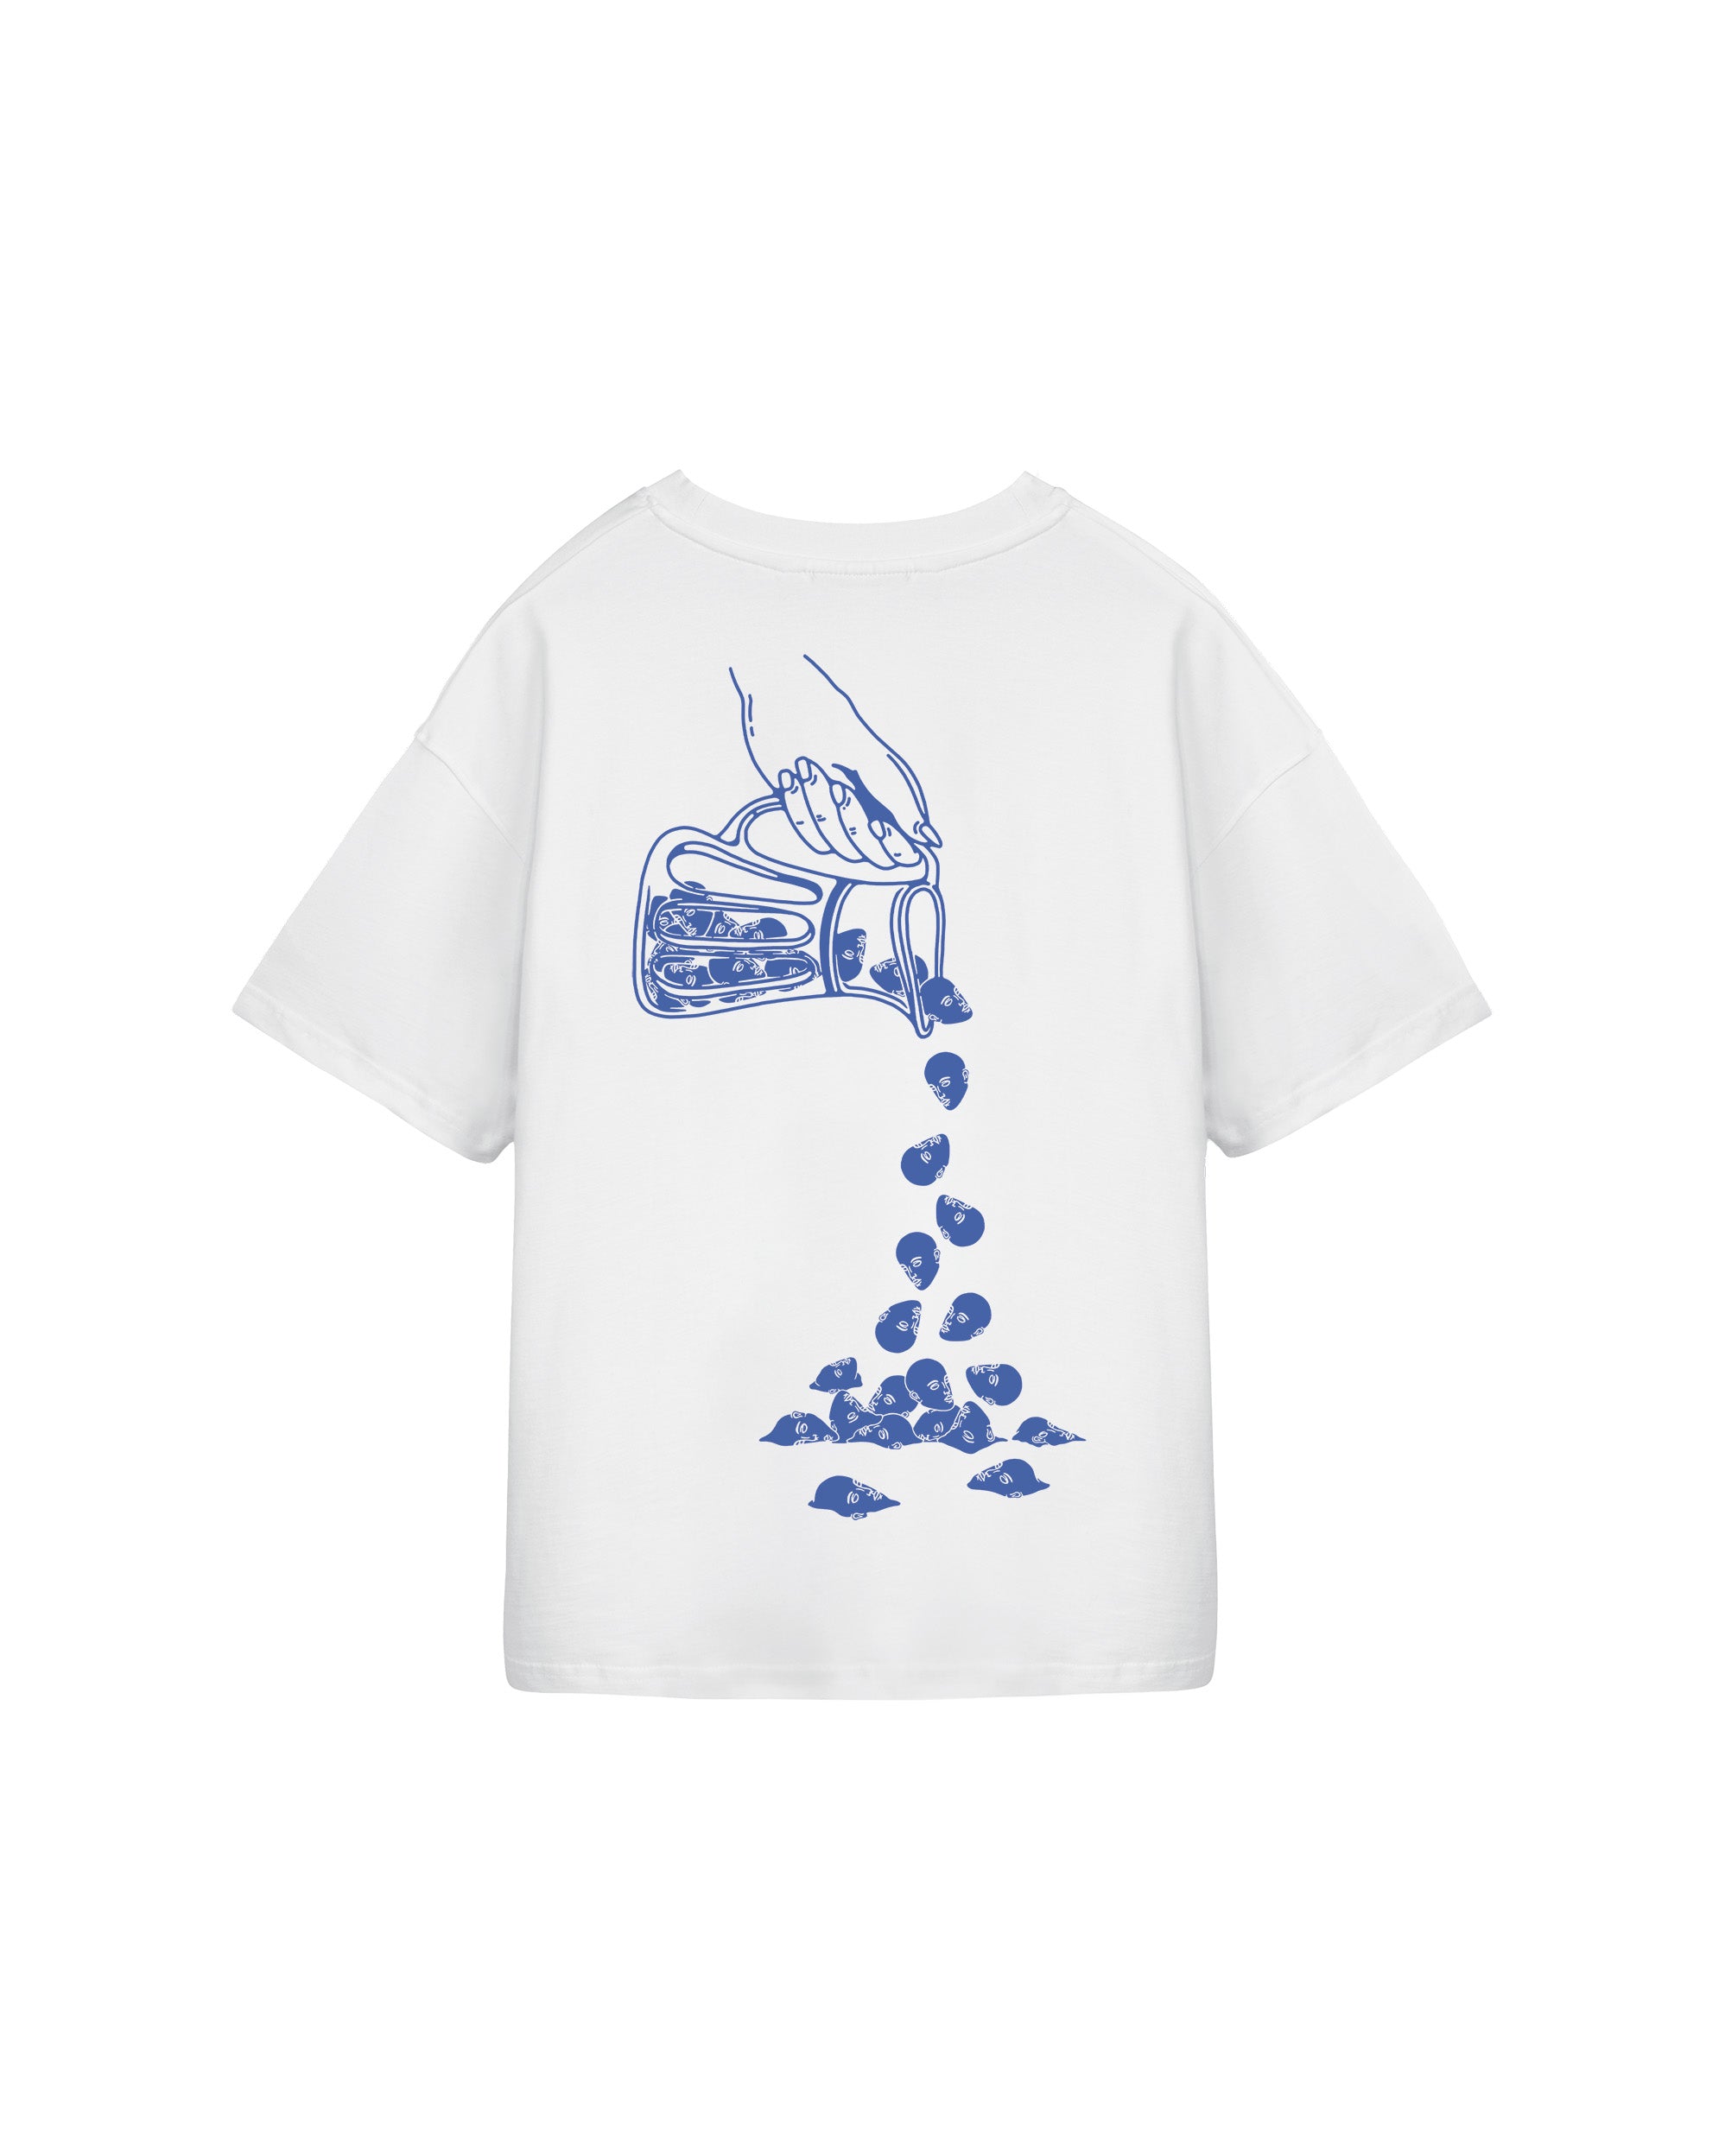 Syrup Visions Basic Tee White (Blue)